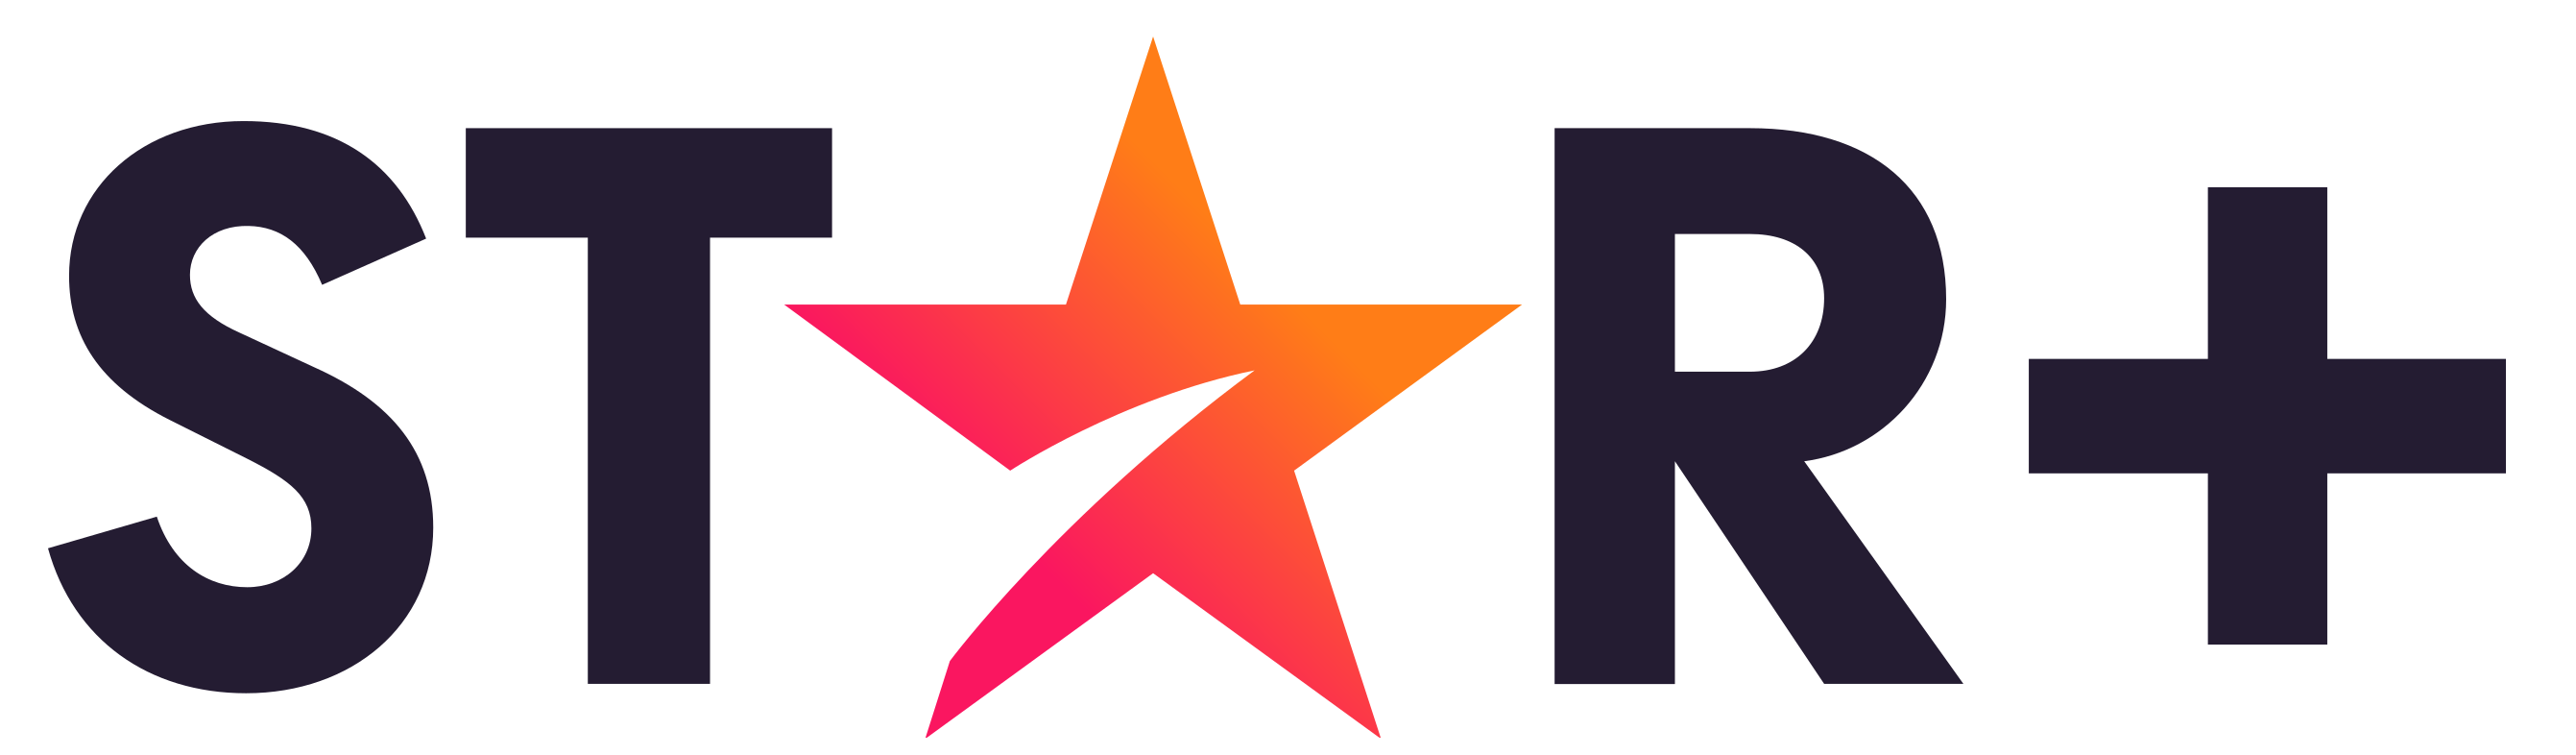 The Star+ logo which features a star instead of the letter A